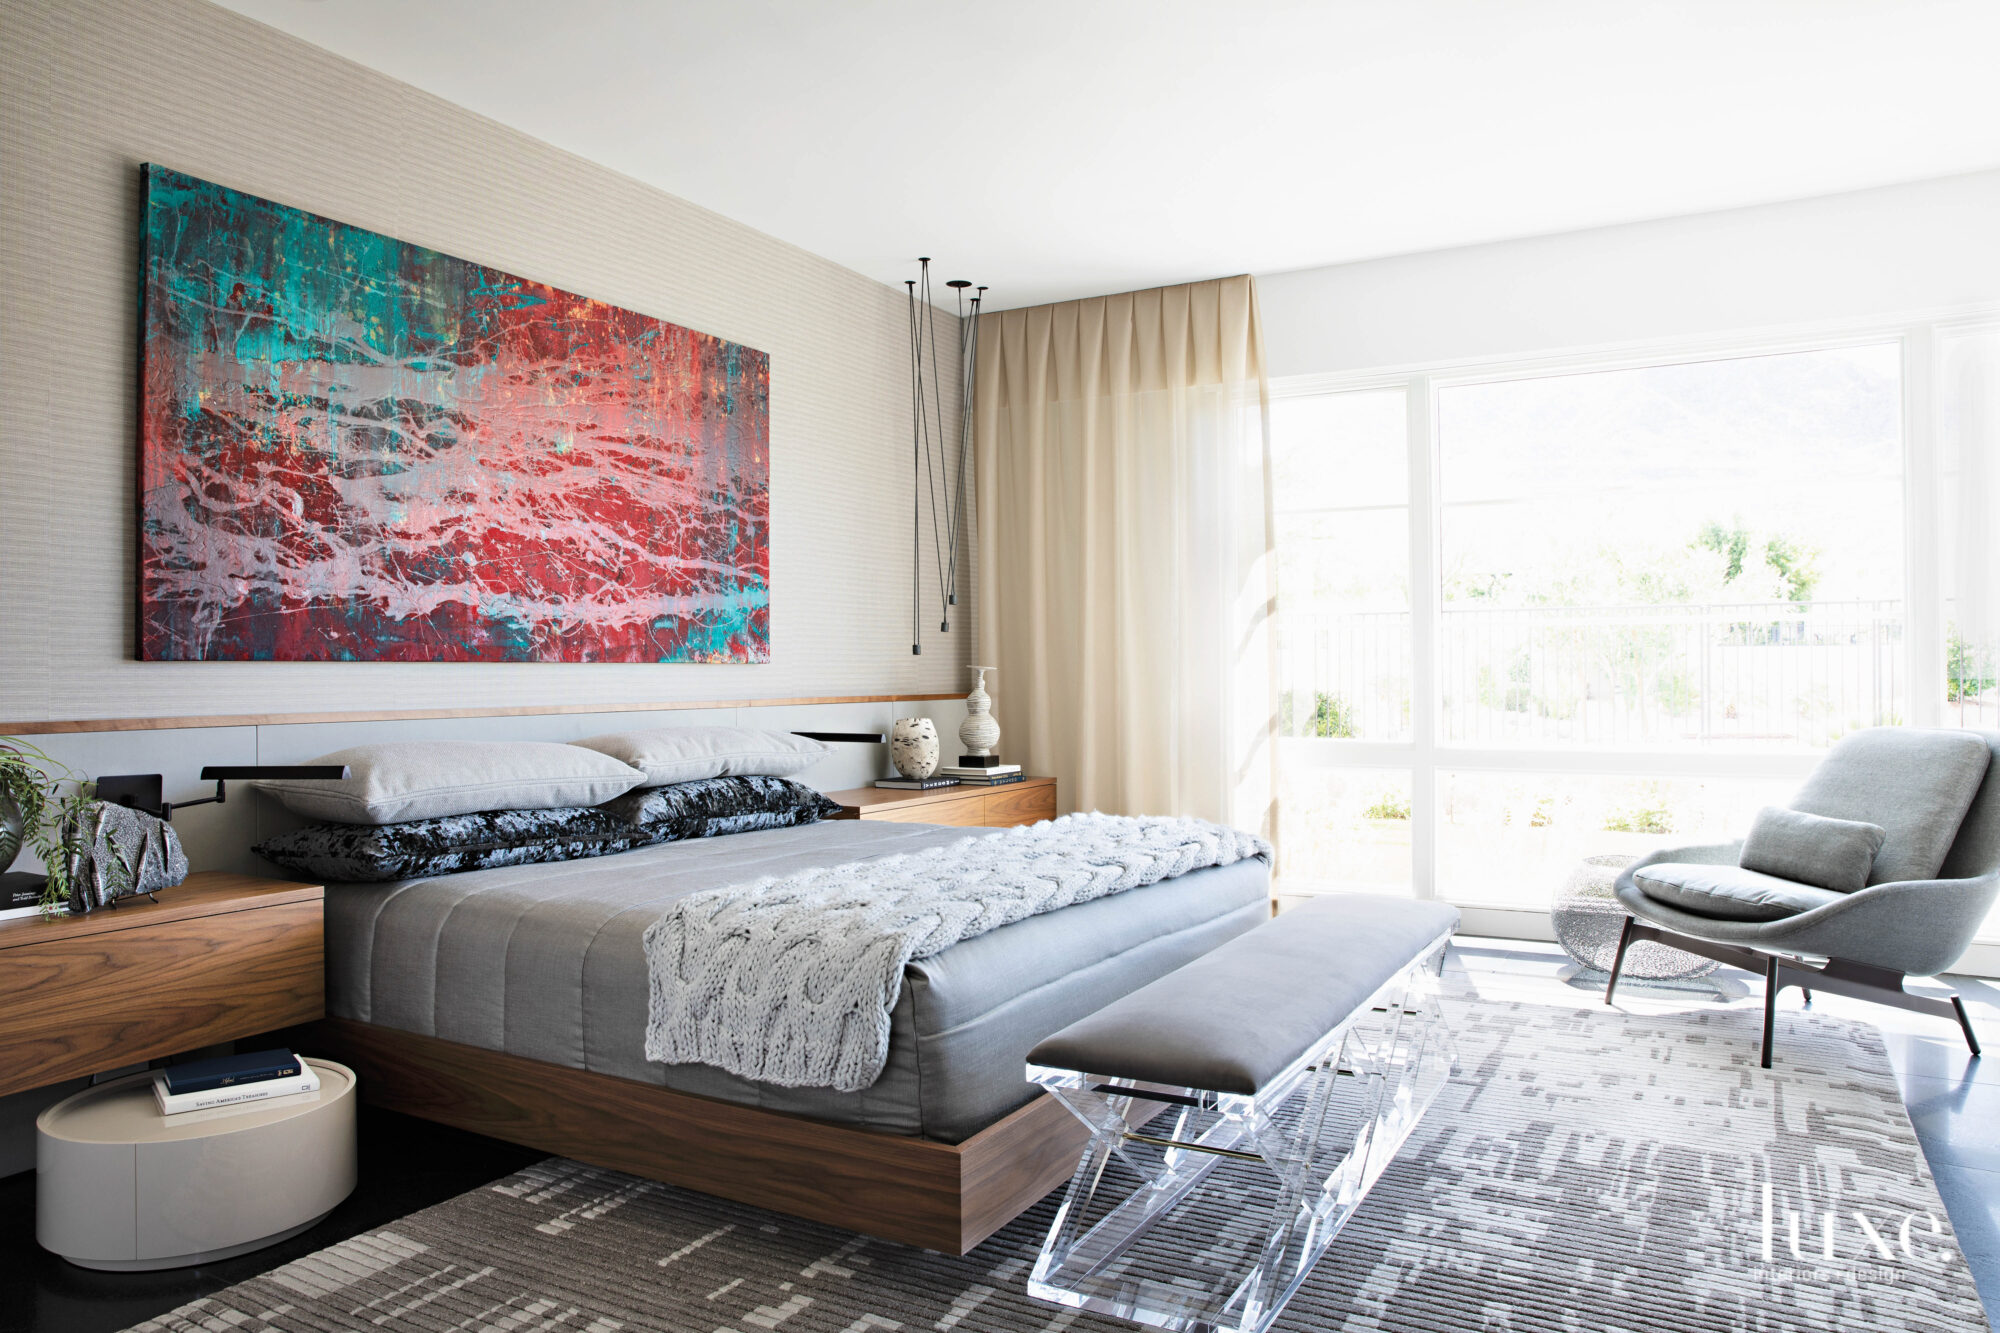 A bright red-and-turquoise abstract painting hangs above the bed in the otherwise neutral master bedroom.